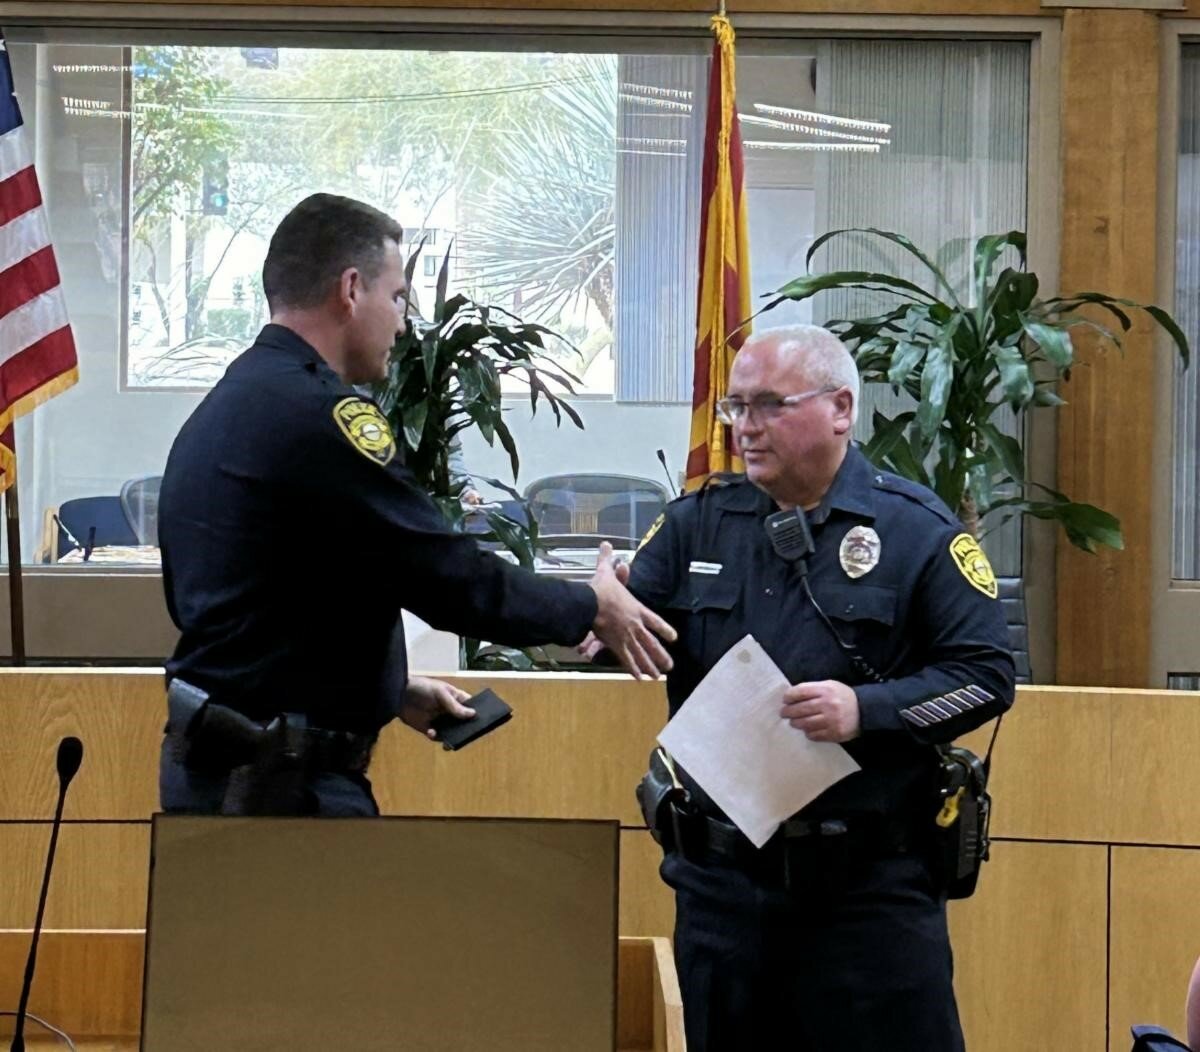 Officer James Gibson shakes hands with Chief Freeman Carney at his retirement celebration.